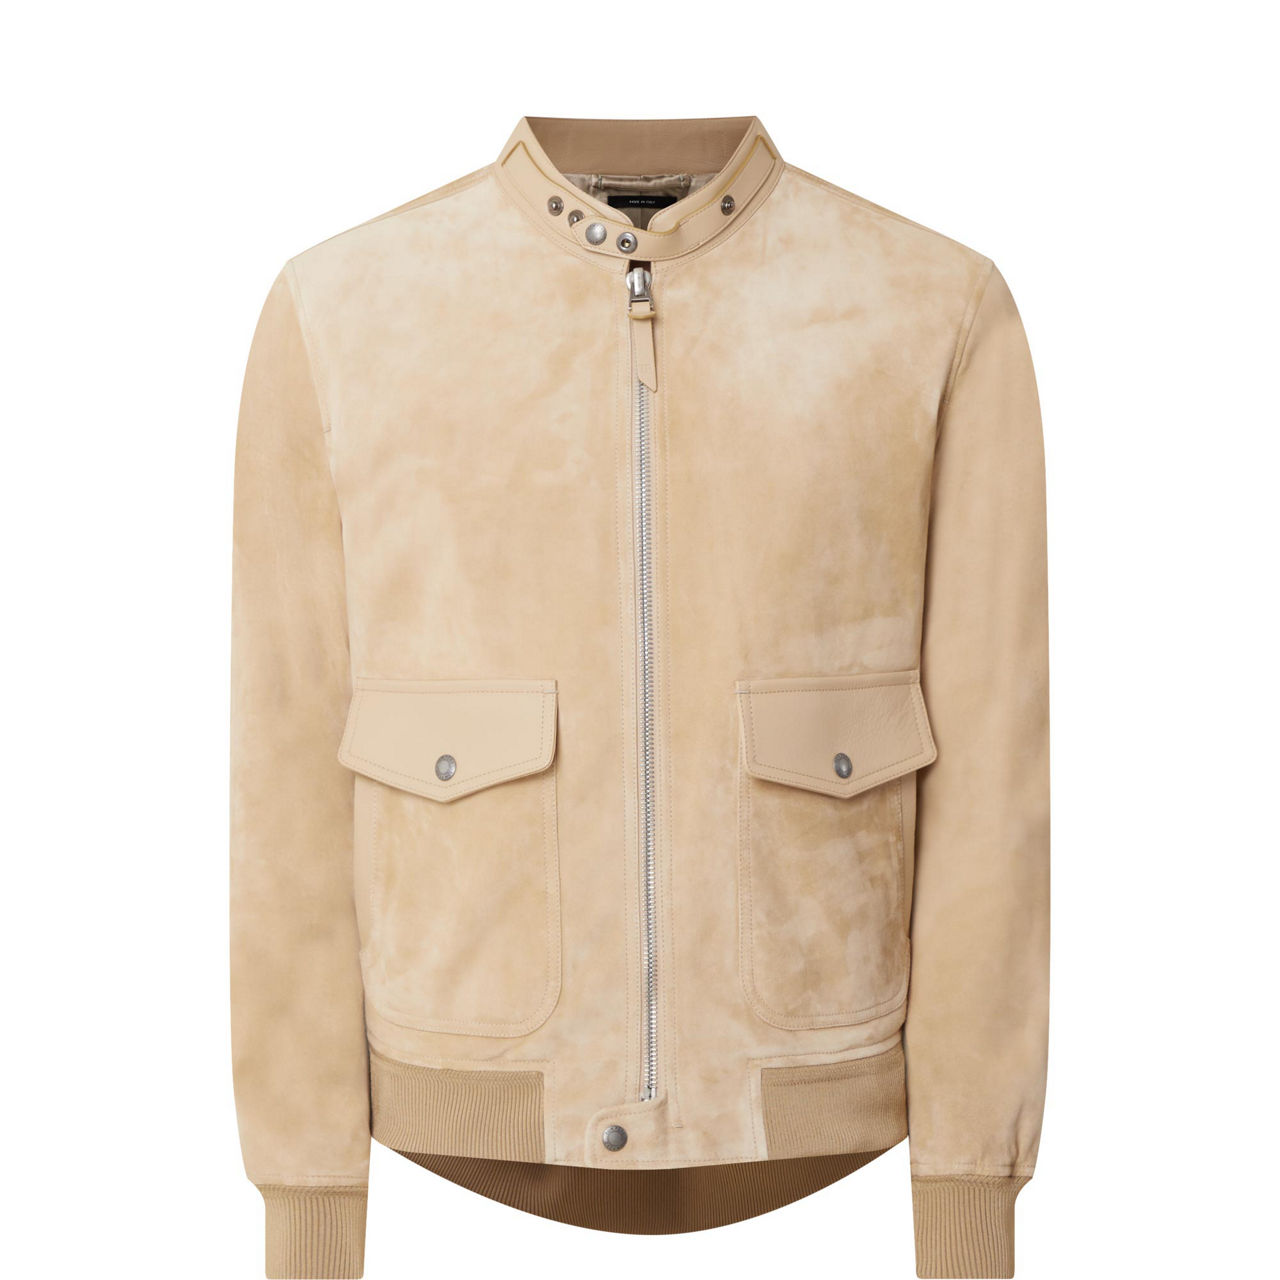 Shop the adidas x Gucci Prince of Wales jacket in brown at GUCCI.COM. Enjoy  Free Shipping and Complimentary Gift Wrapping.